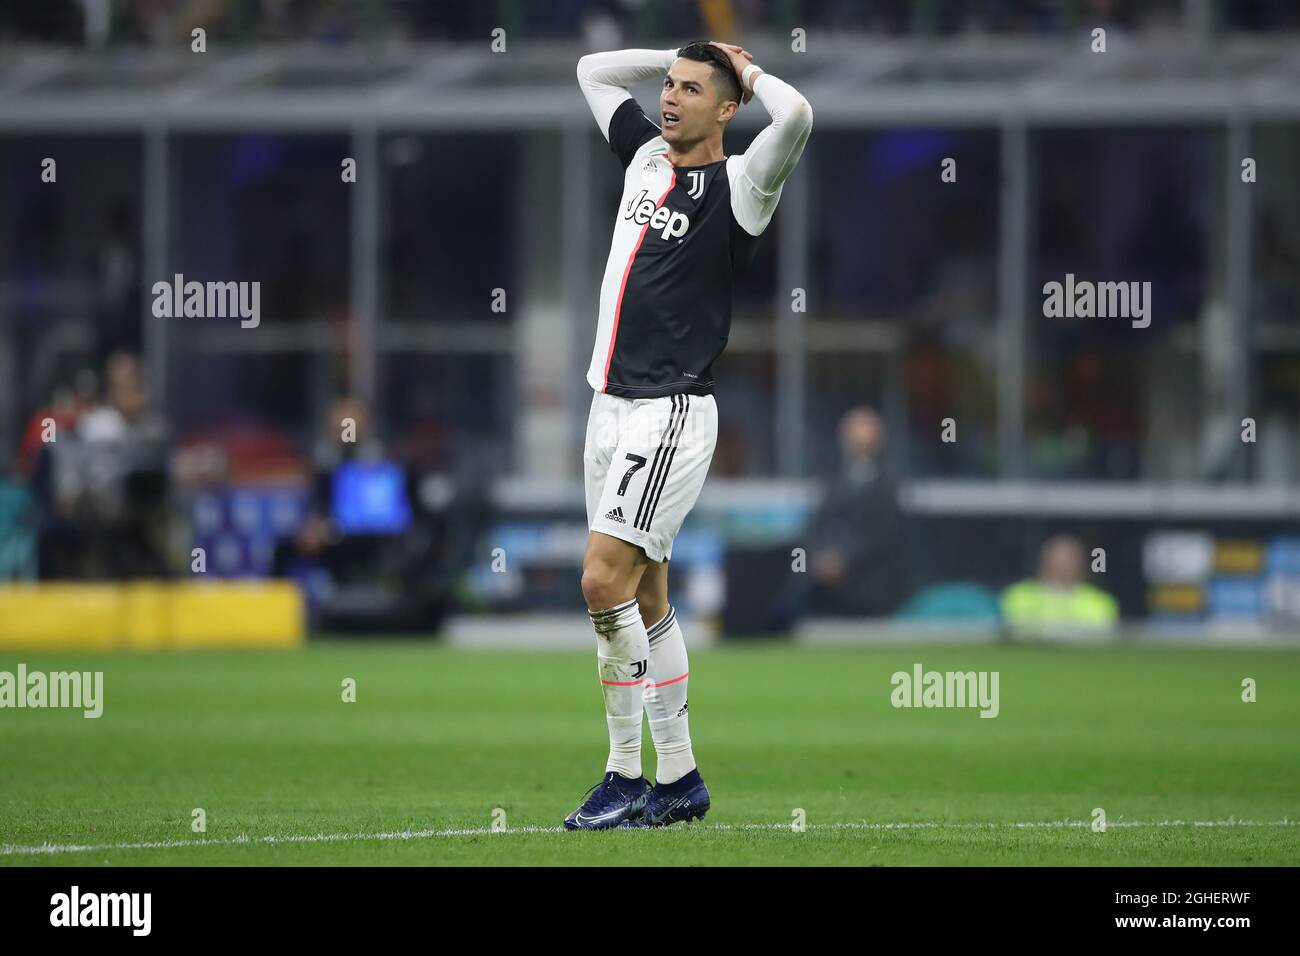 Cristiano Ronaldo of Juventus reacts after hitting the crossbar with a  first half effort during the Serie A match at Giuseppe Meazza, Milan.  Picture date: 6th October 2019. Picture credit should read: